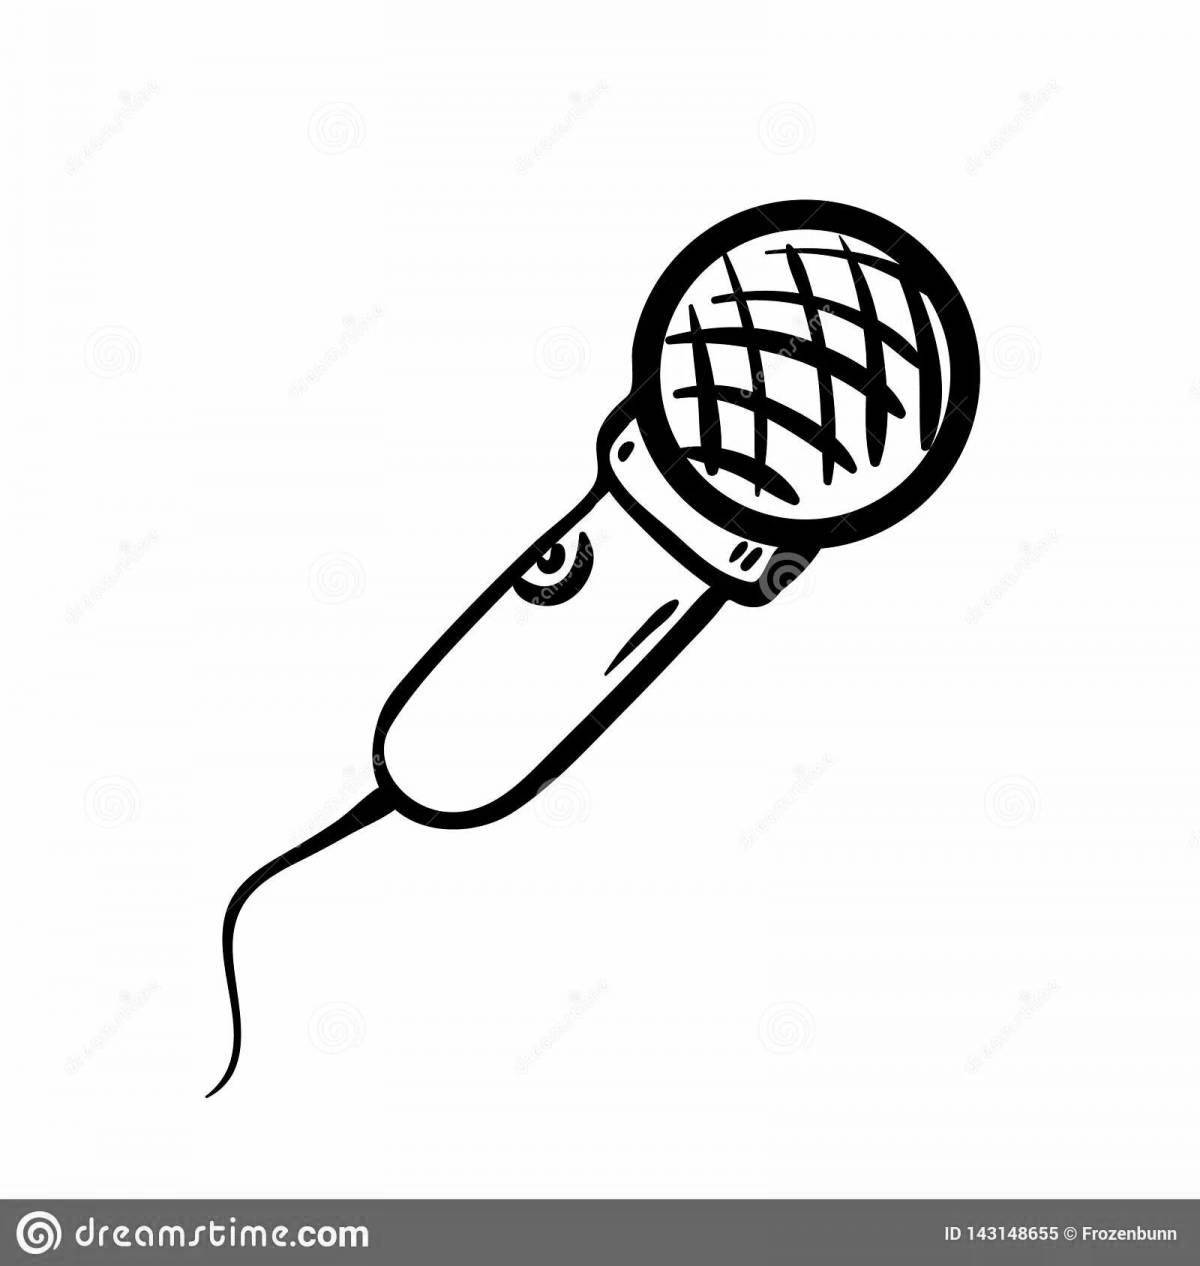 Glowing microphone coloring page for kids